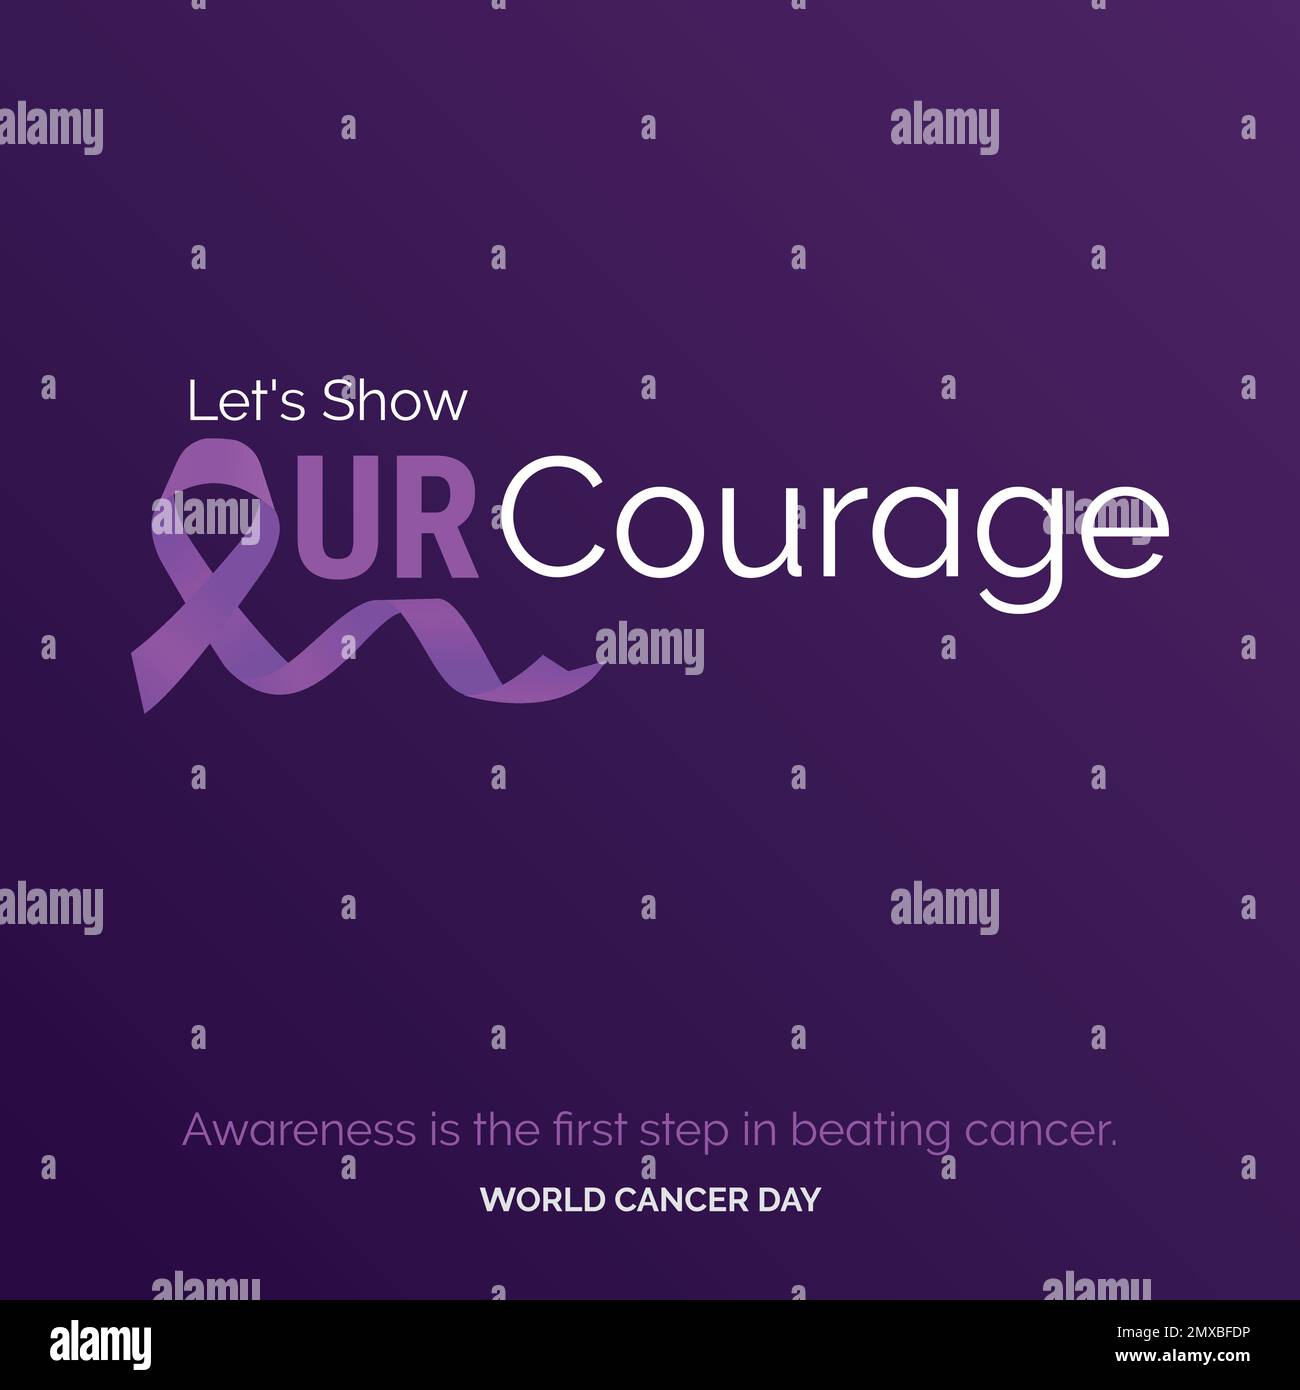 Let's Show Our courage Ribbon Typography. Awareness is the first step in beating cancer - World Cancer Day Stock Vector